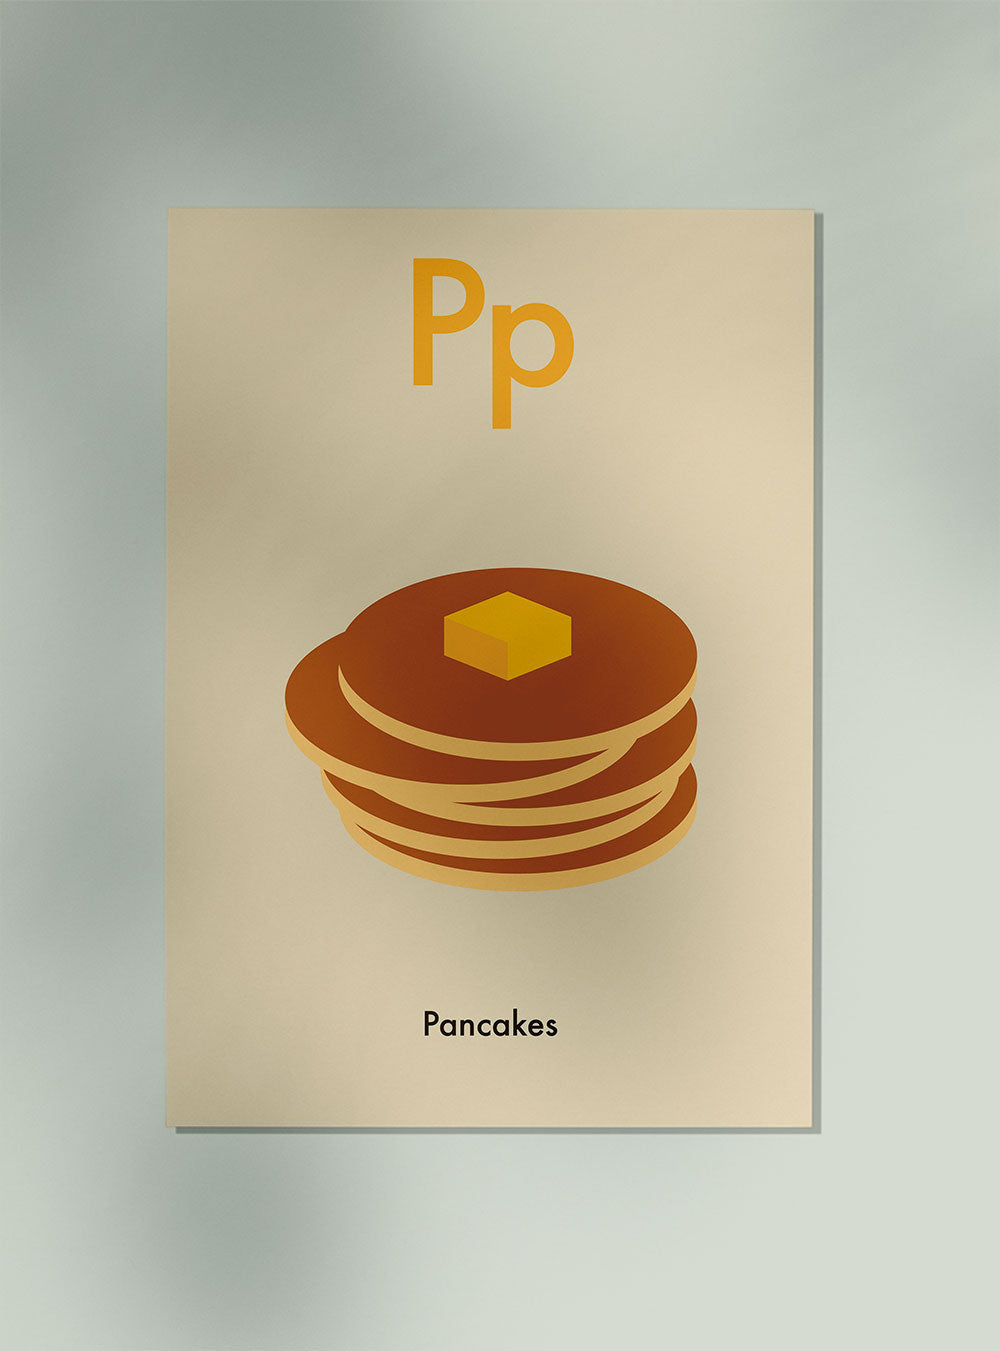 P for Pancakes - Children's Alphabet Poster in English